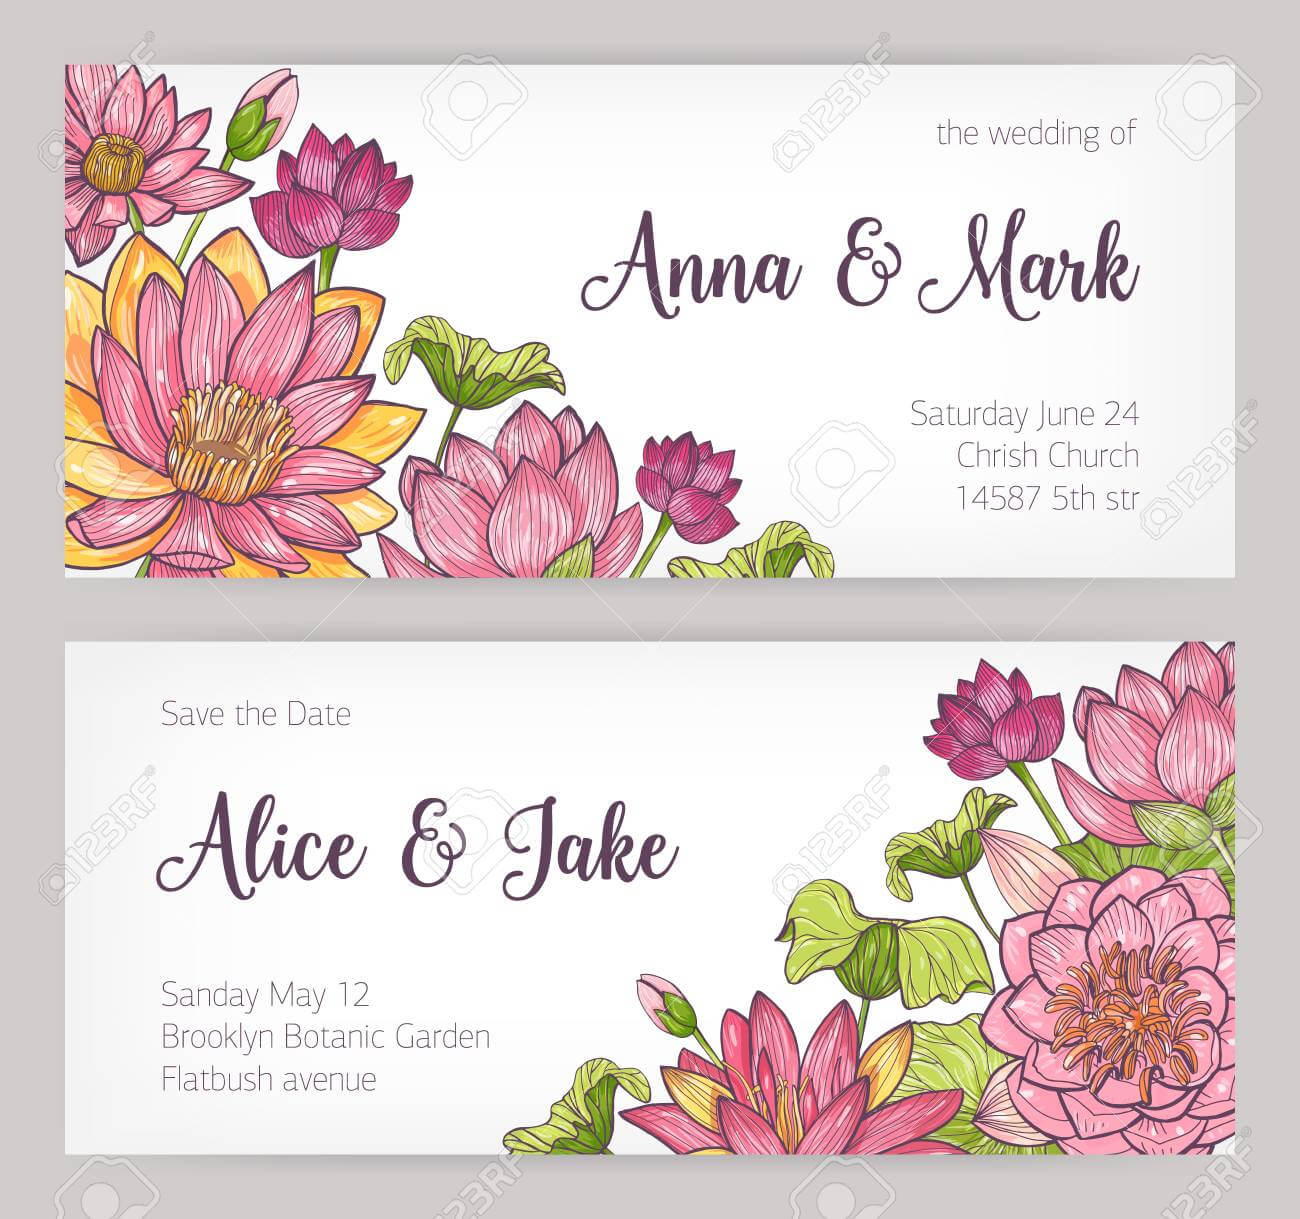 Wedding Invitation And Save The Date Card Templates Decorated.. Intended For Save The Date Cards Templates